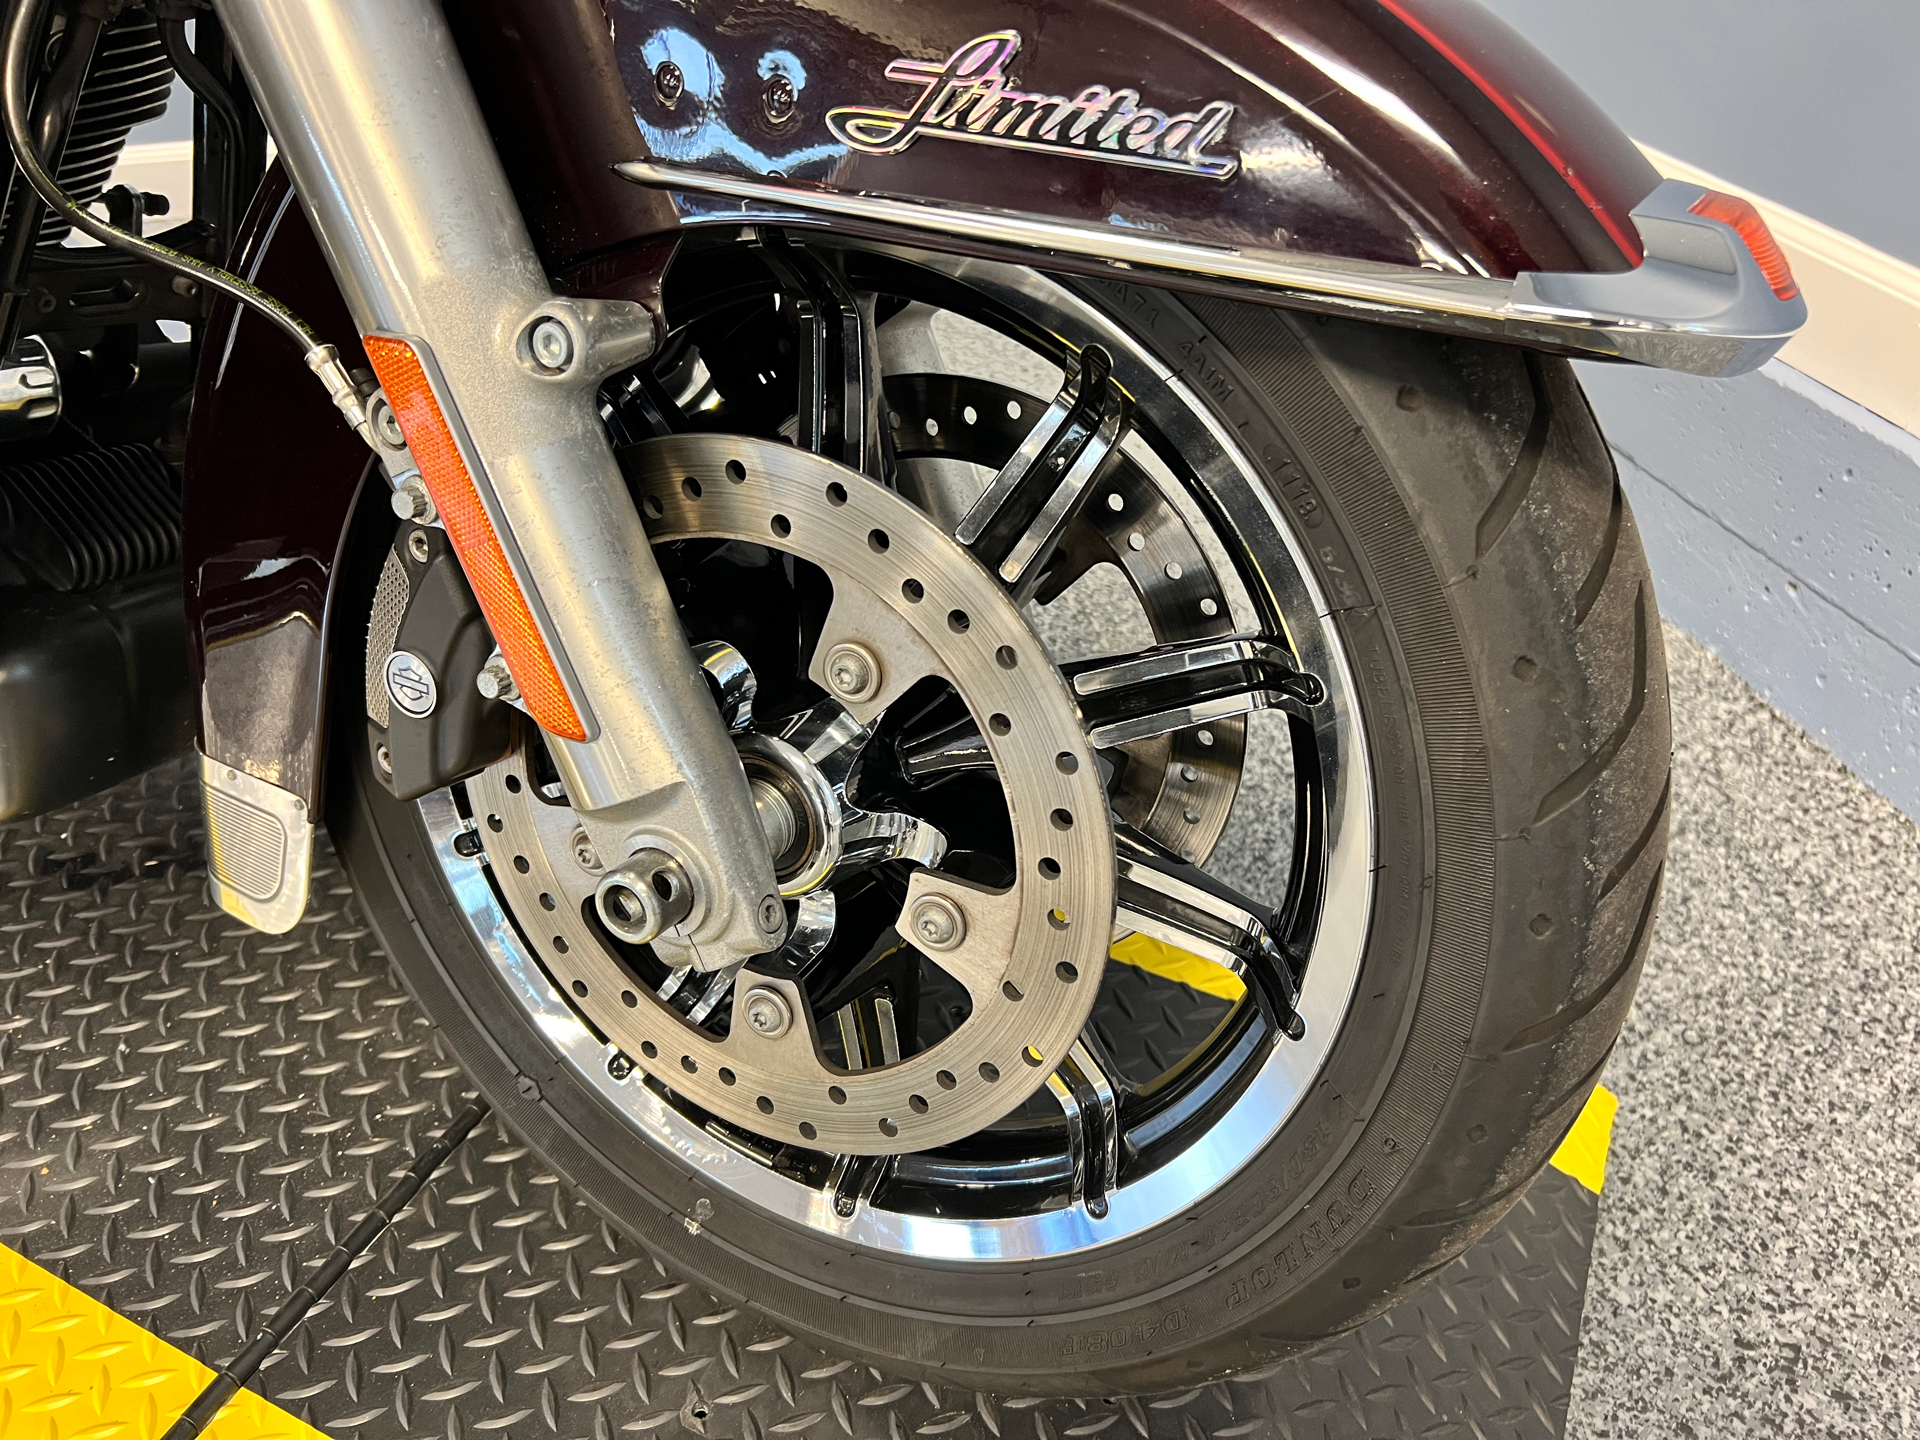 2015 Harley-Davidson Electra Glide® Ultra Classic® in Meredith, New Hampshire - Photo 4